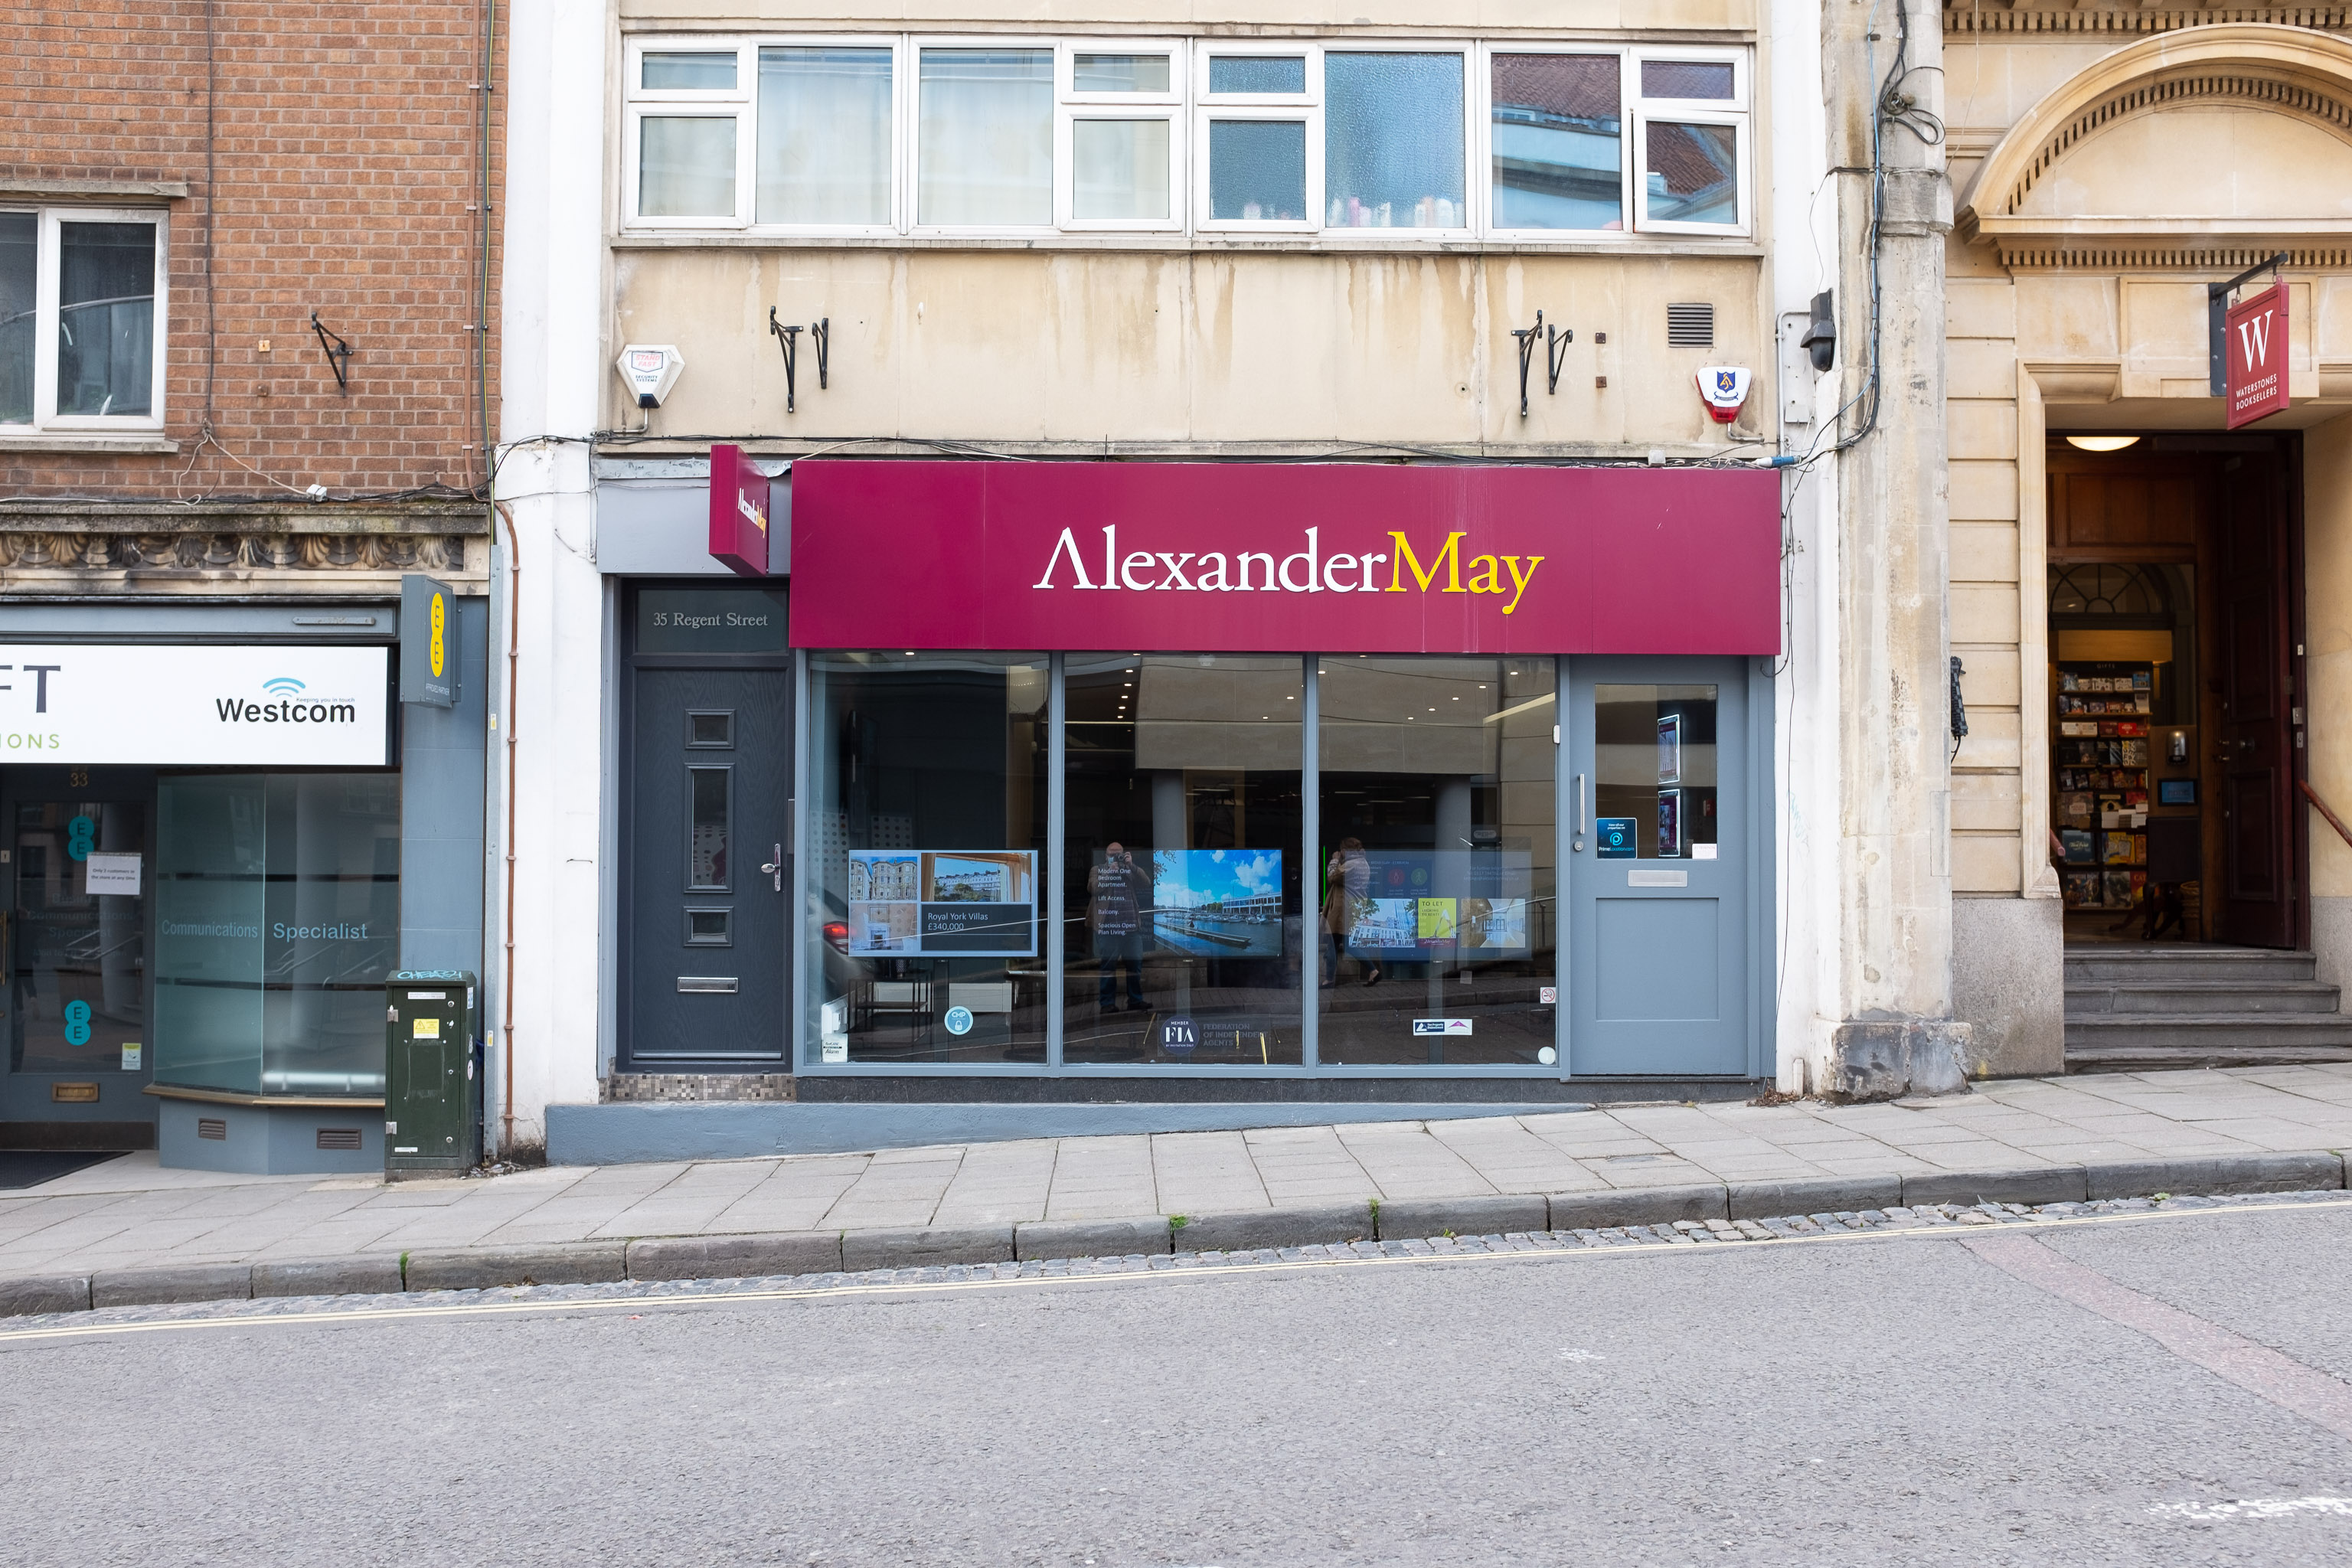 Alexander May
Another block, another estate agent.
